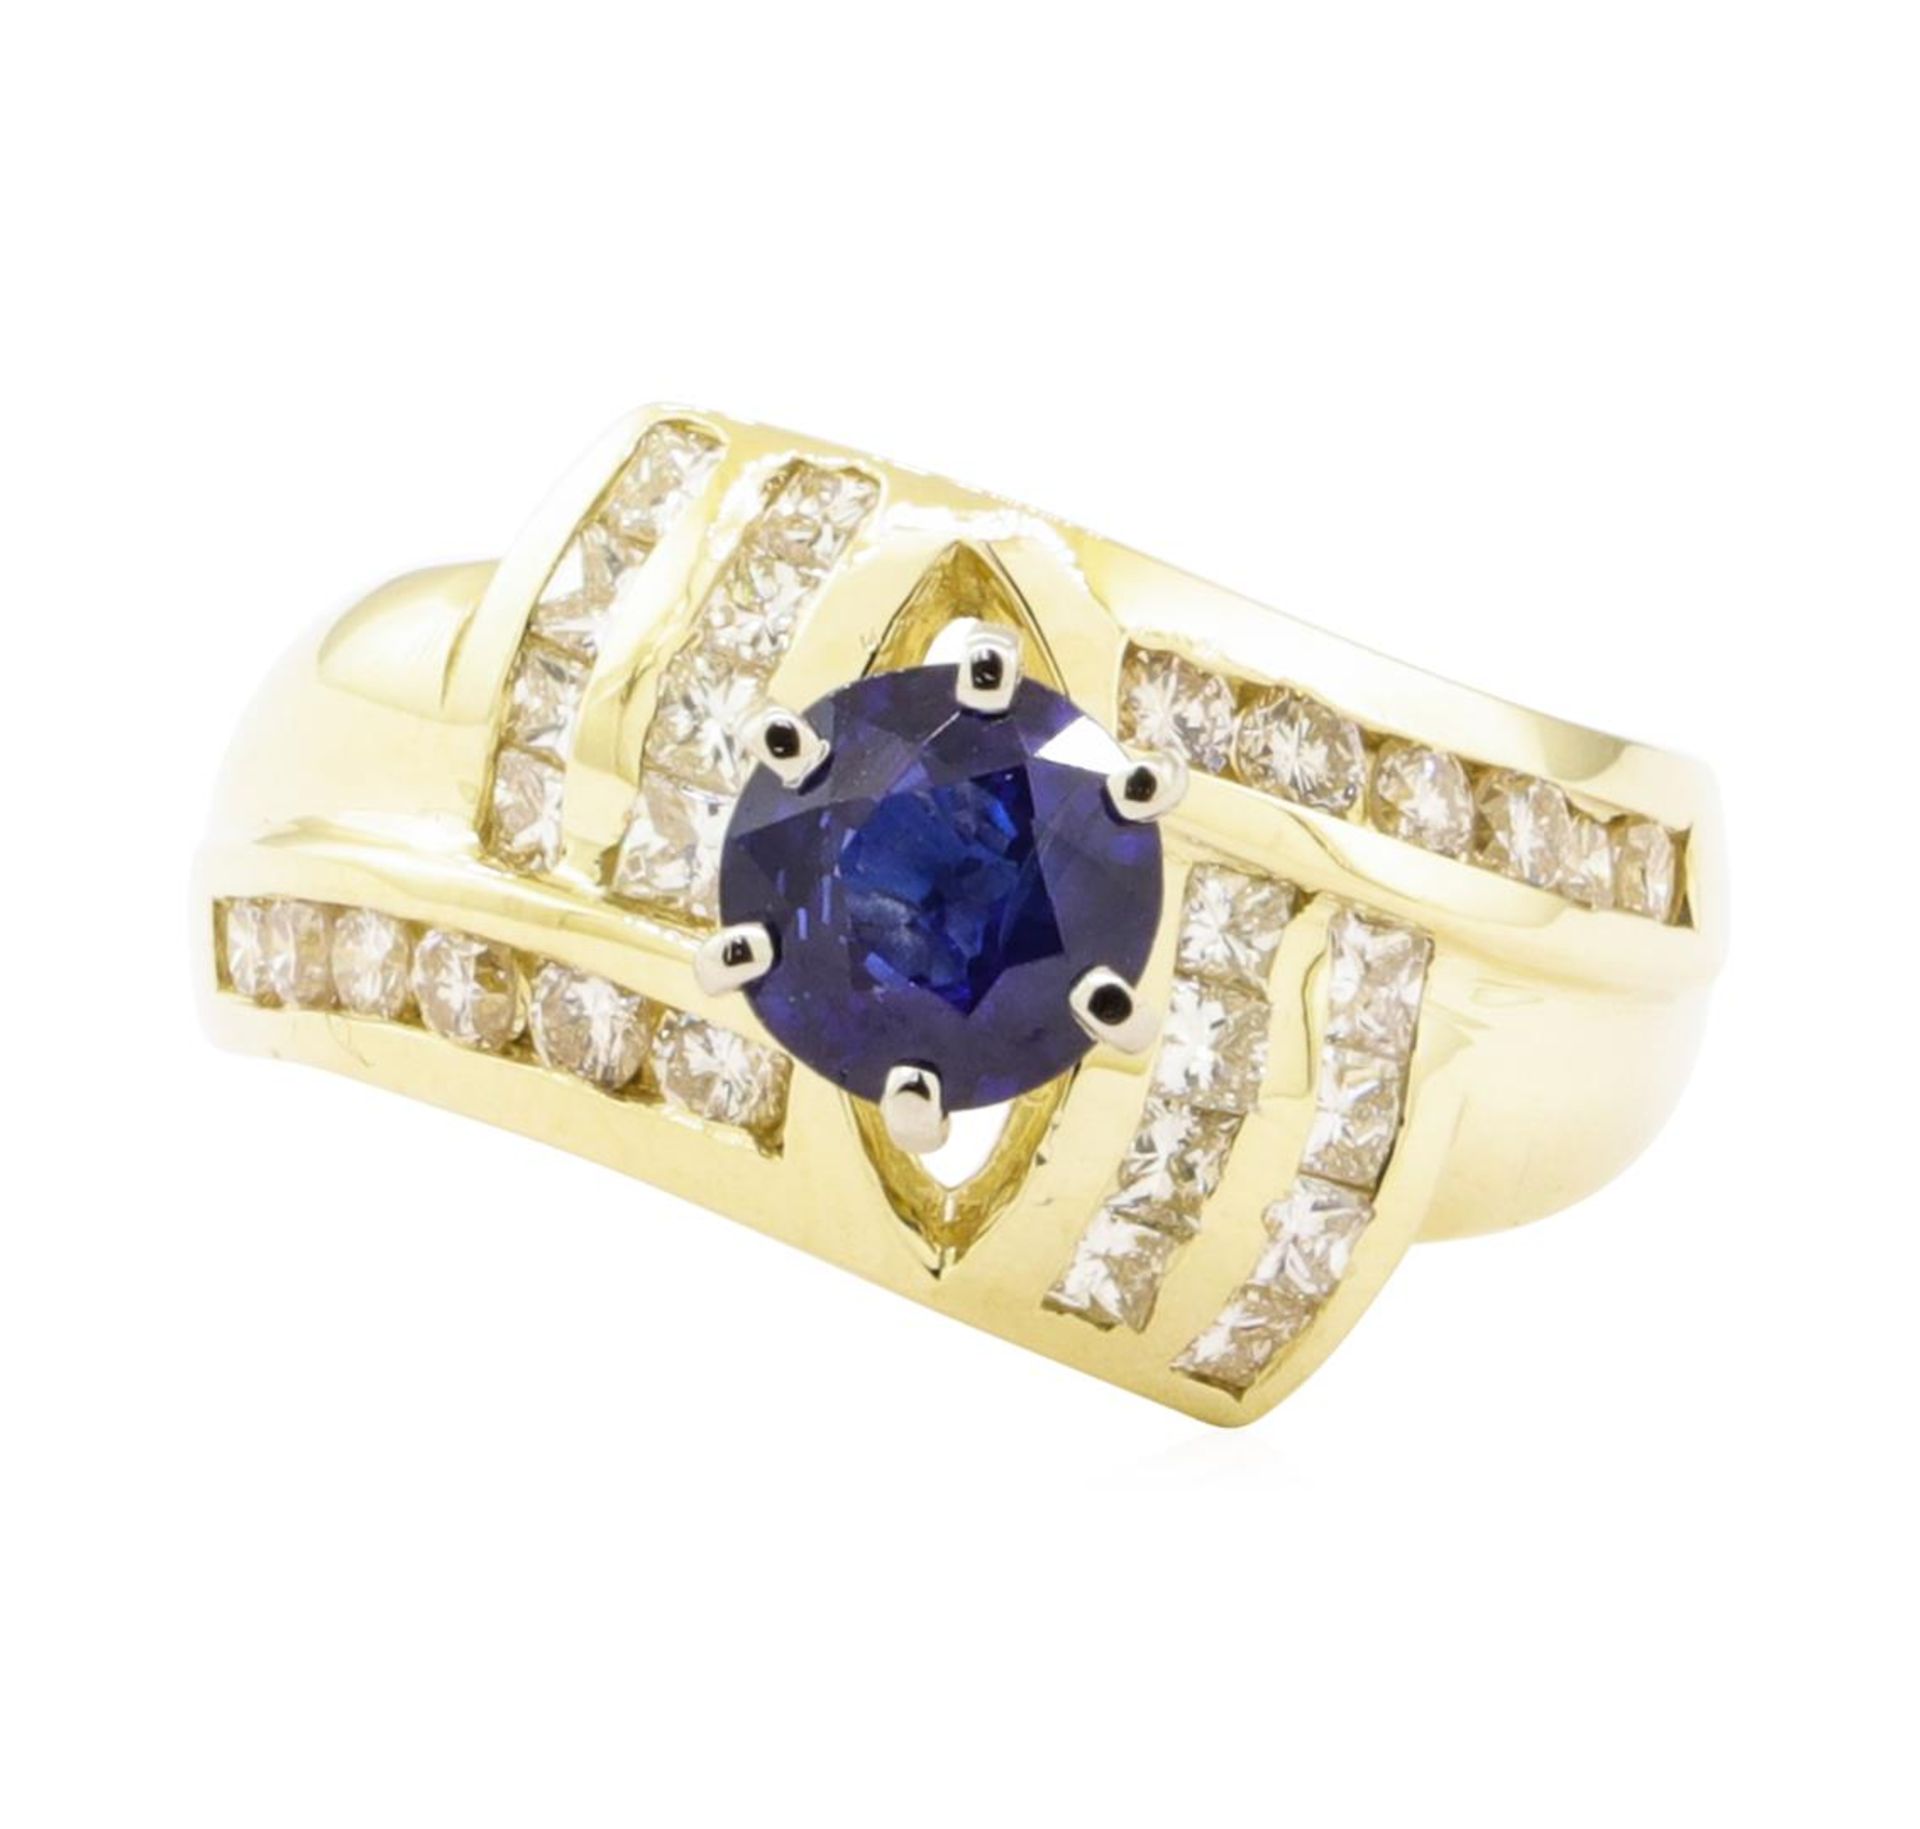 1.77 ctw Blue Sapphire And Diamond Ring - 14KT Yellow Gold - Image 2 of 5